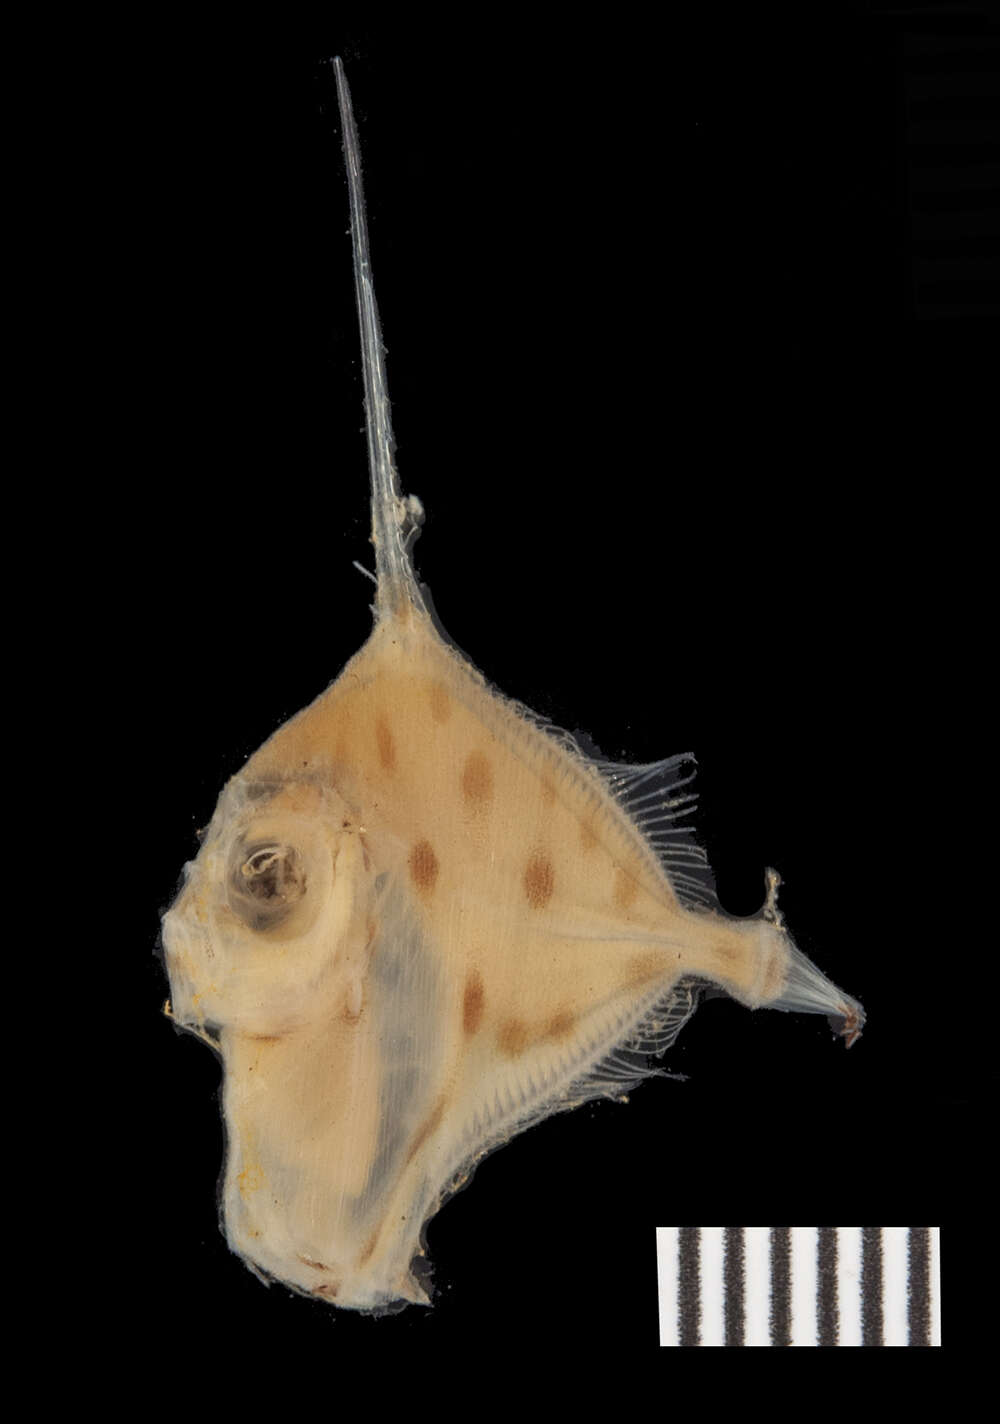 Image of Xenolepidichthys